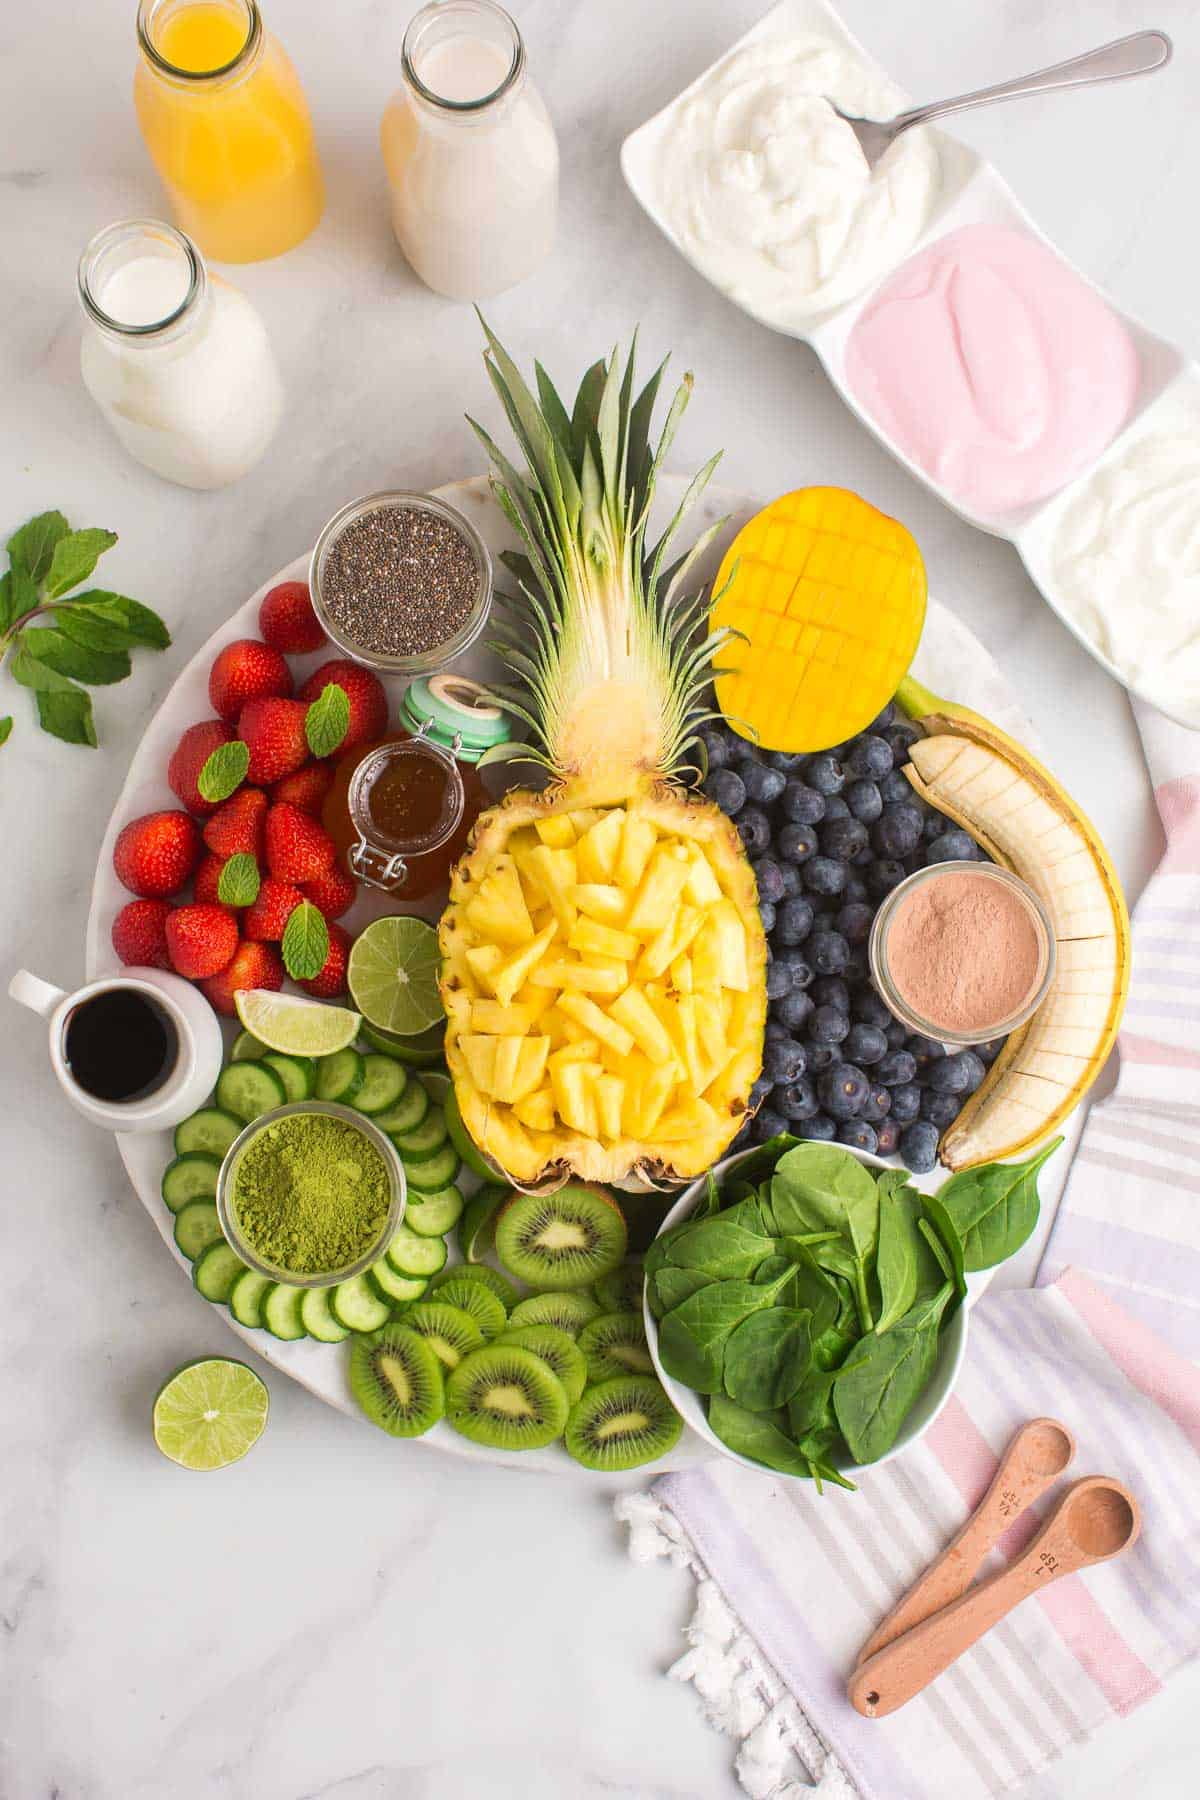 Fruit and assorted toppings arranged on a board for a smoothie bar.